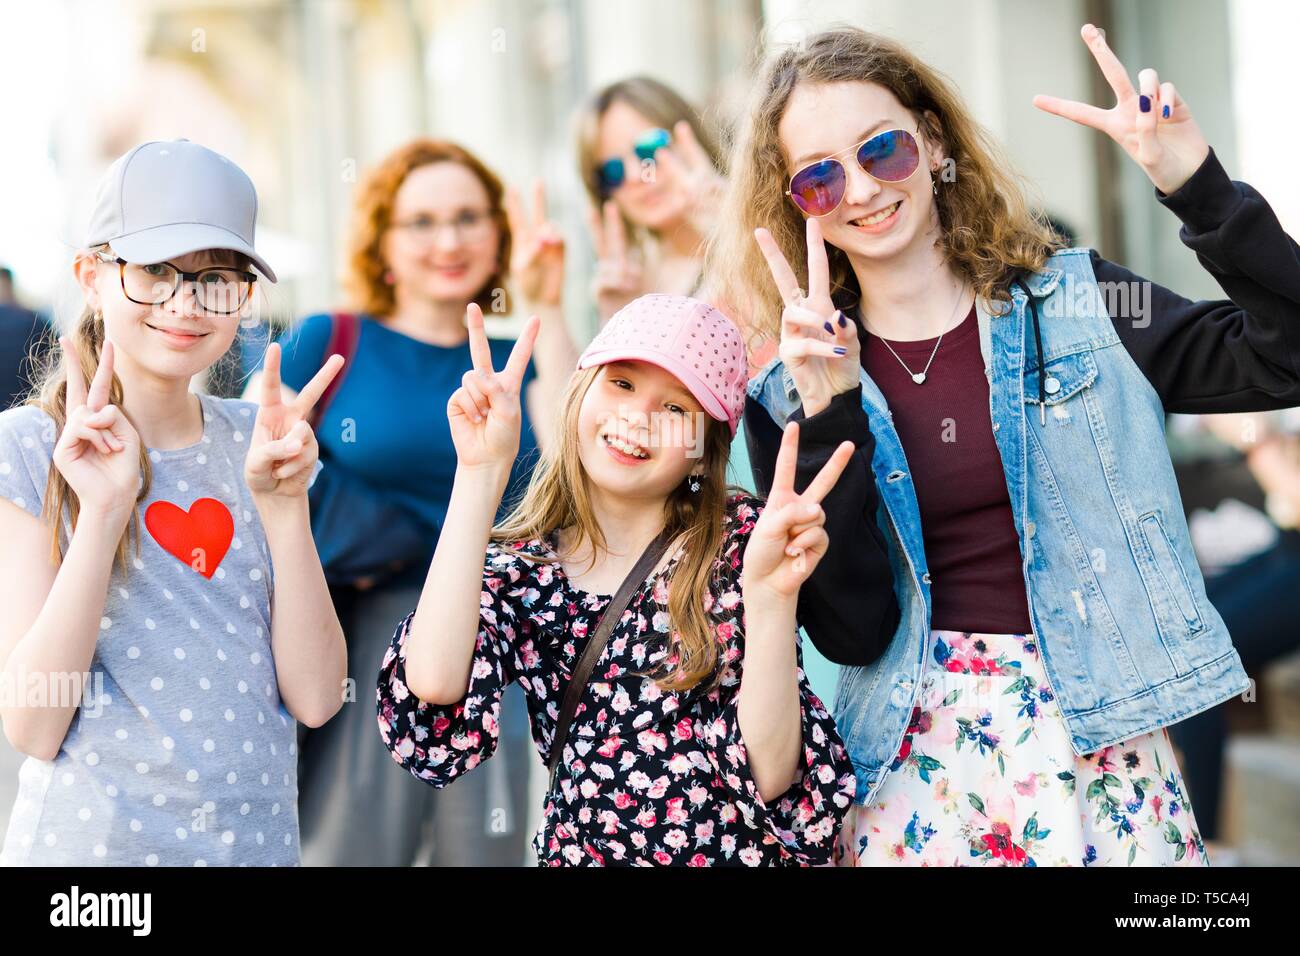 Three young girls posing on city streets - showing victory sign with fingers - fun in the city Stock Photo